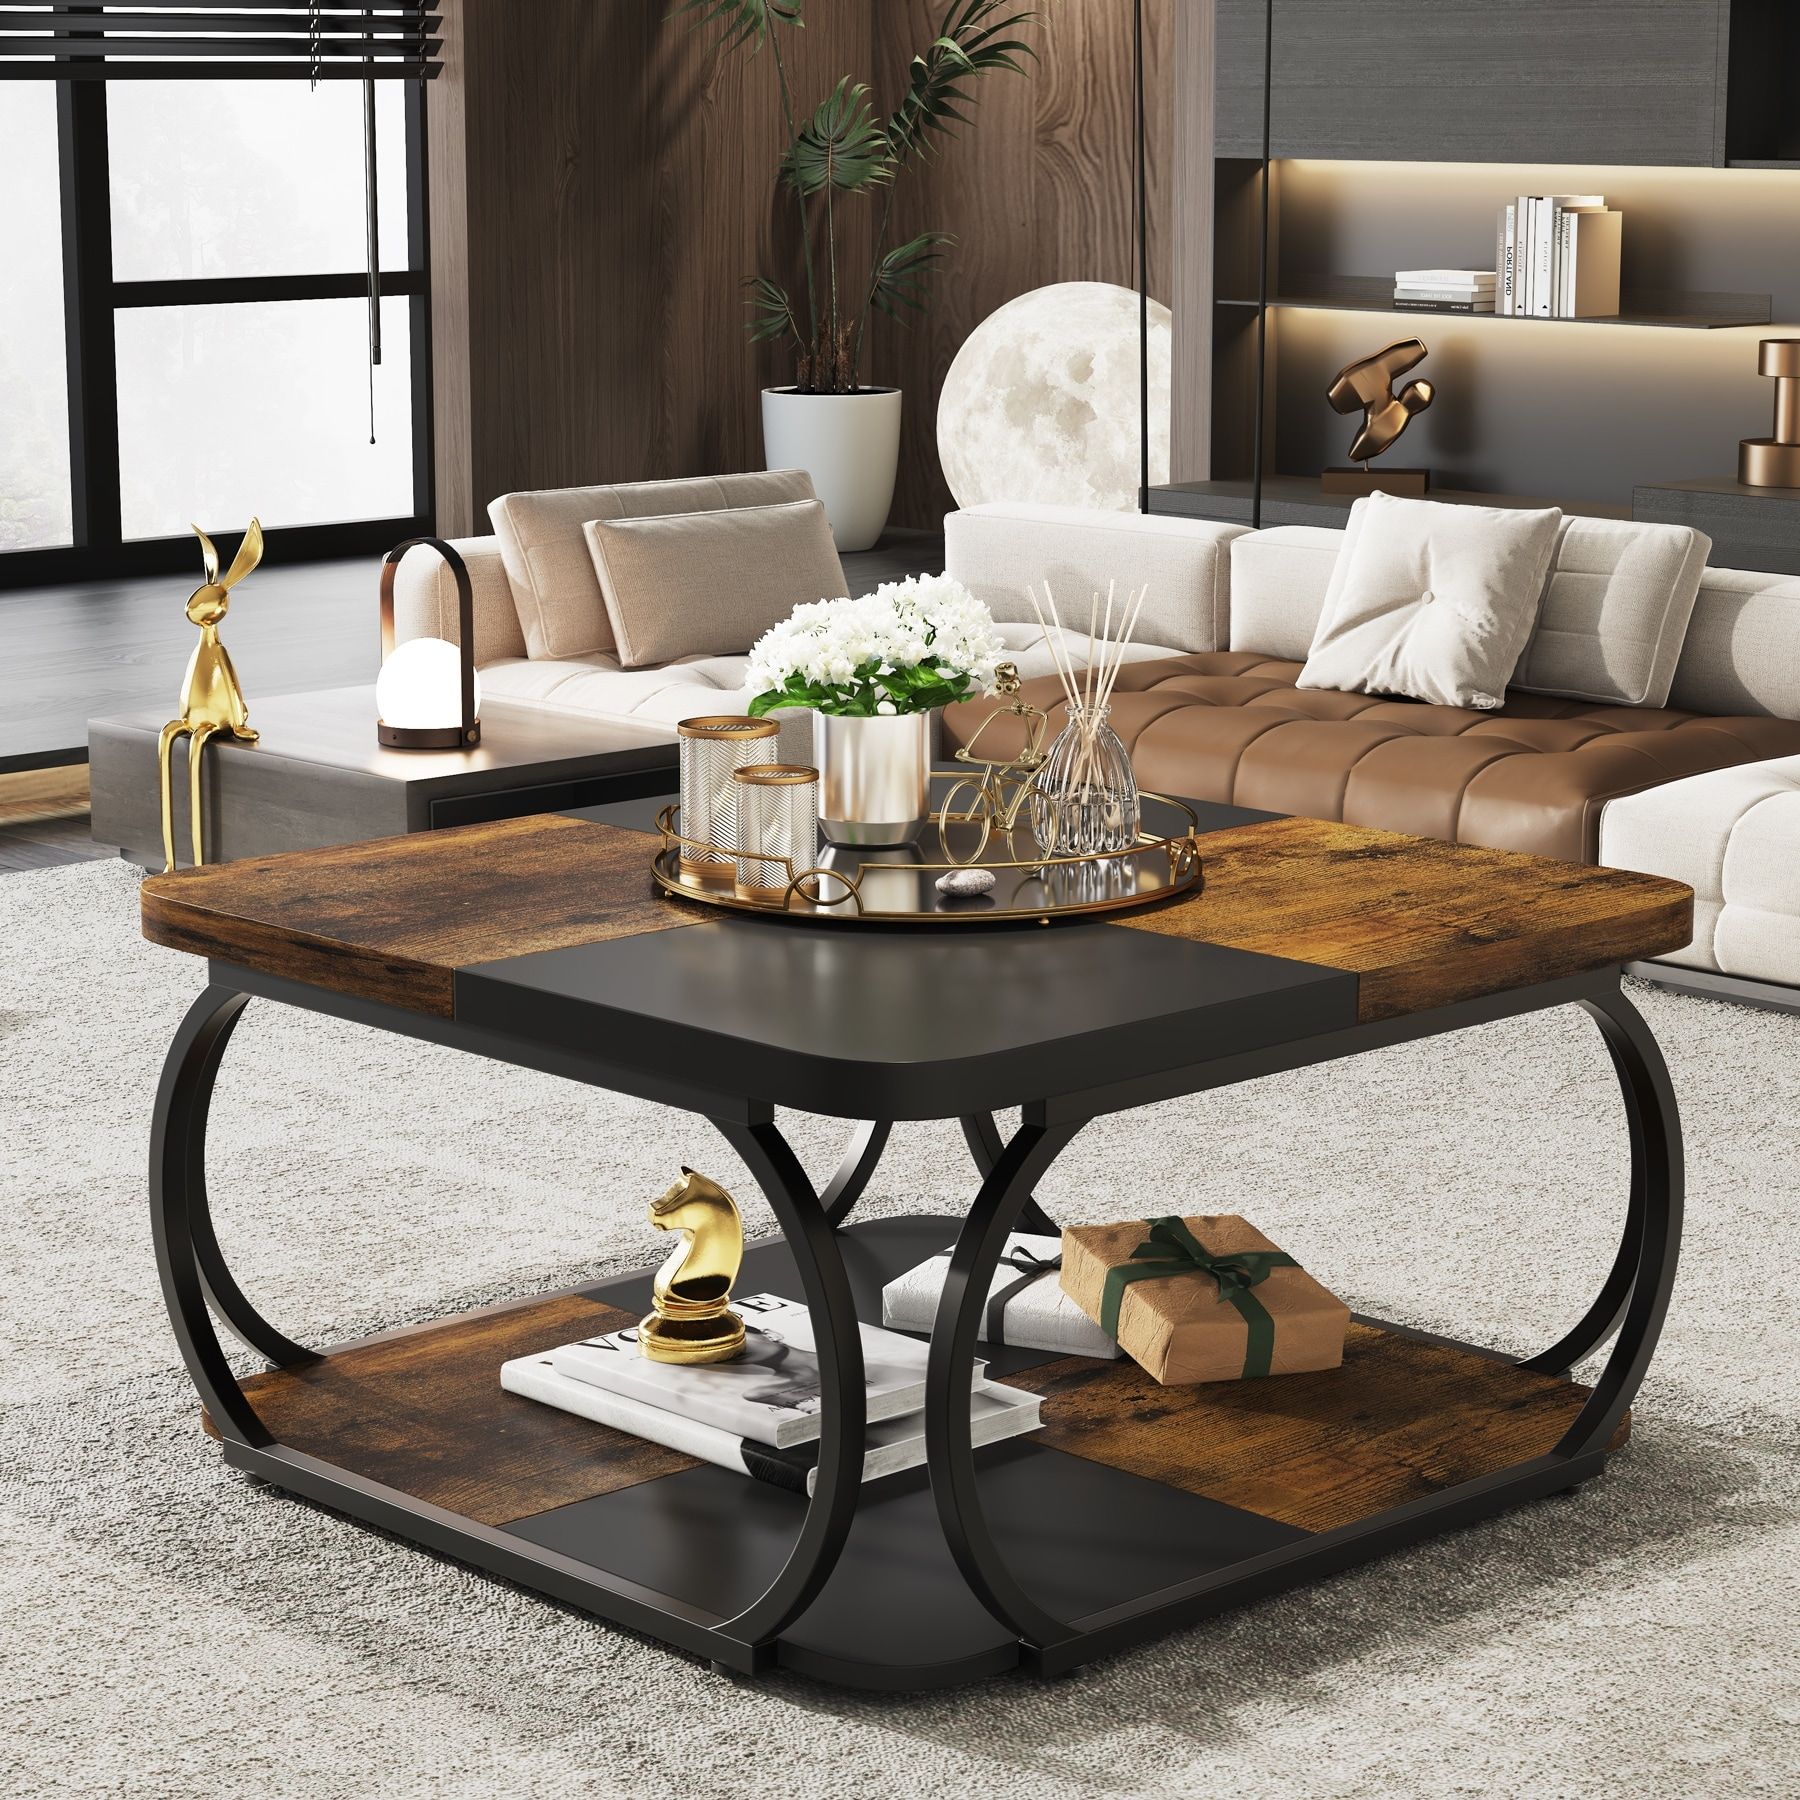 2 Tiers Square Coffee Table With Storage Shelf, 39 Inches Low Farmhouse Wood  Coffee Table For Living Room – On Sale – Bed Bath & Beyond – 38083953 In Wood Coffee Tables With 2 Tier Storage (View 8 of 15)